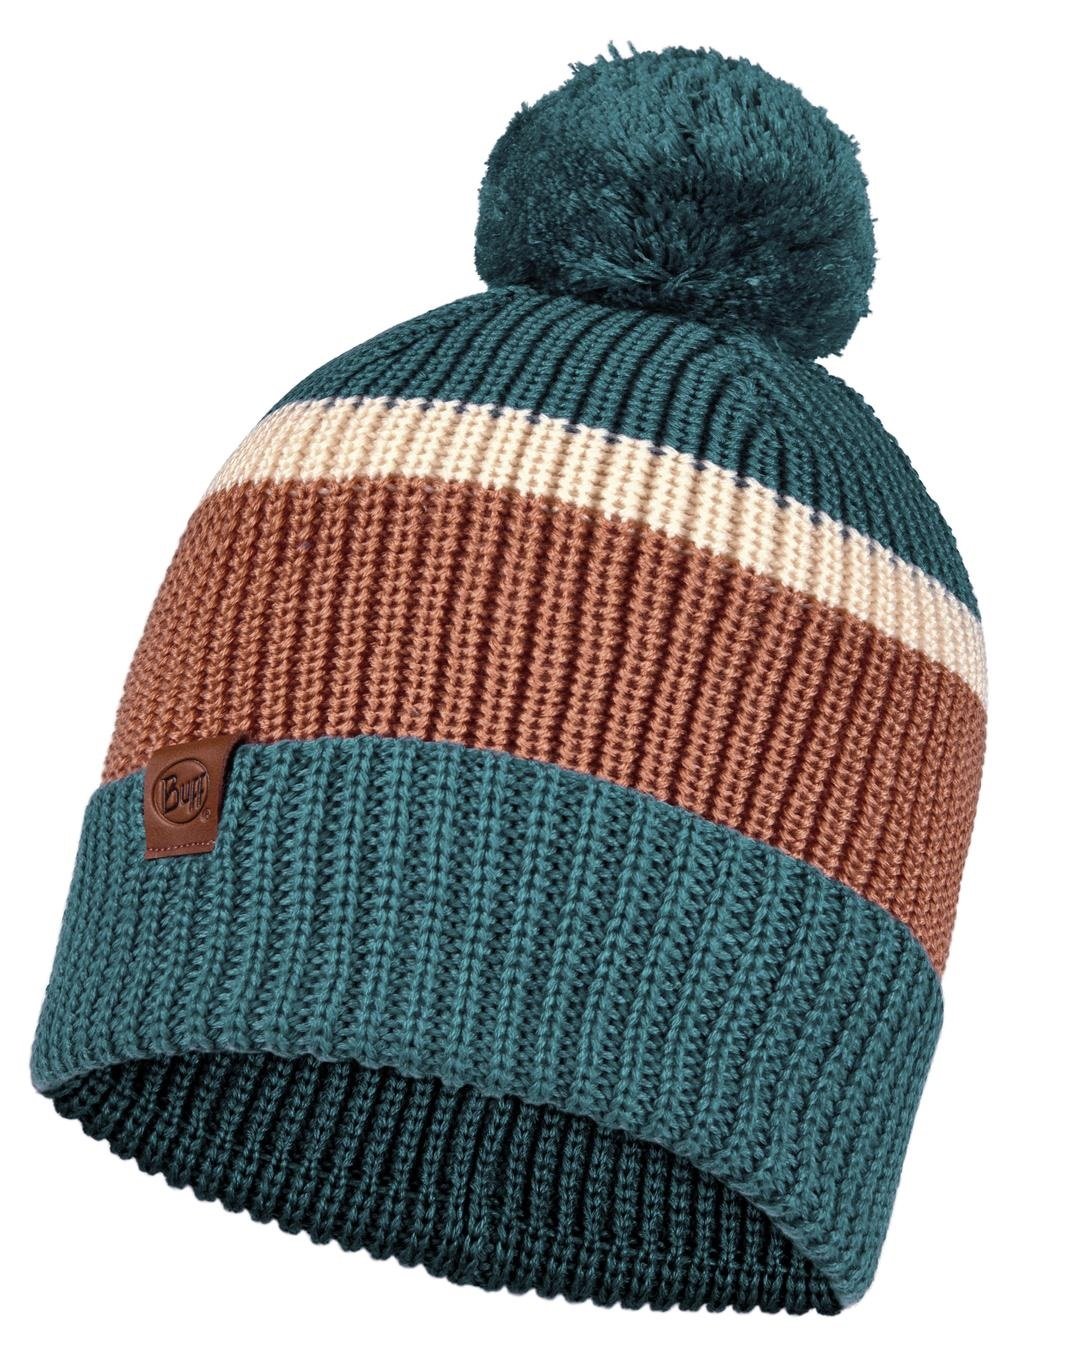 Шапка Buff Knitted Hat Elon Dusty Blue, US:One size, 126464.742.10.00 шапка buff knitted hat niels cru us one size 126457 014 10 00